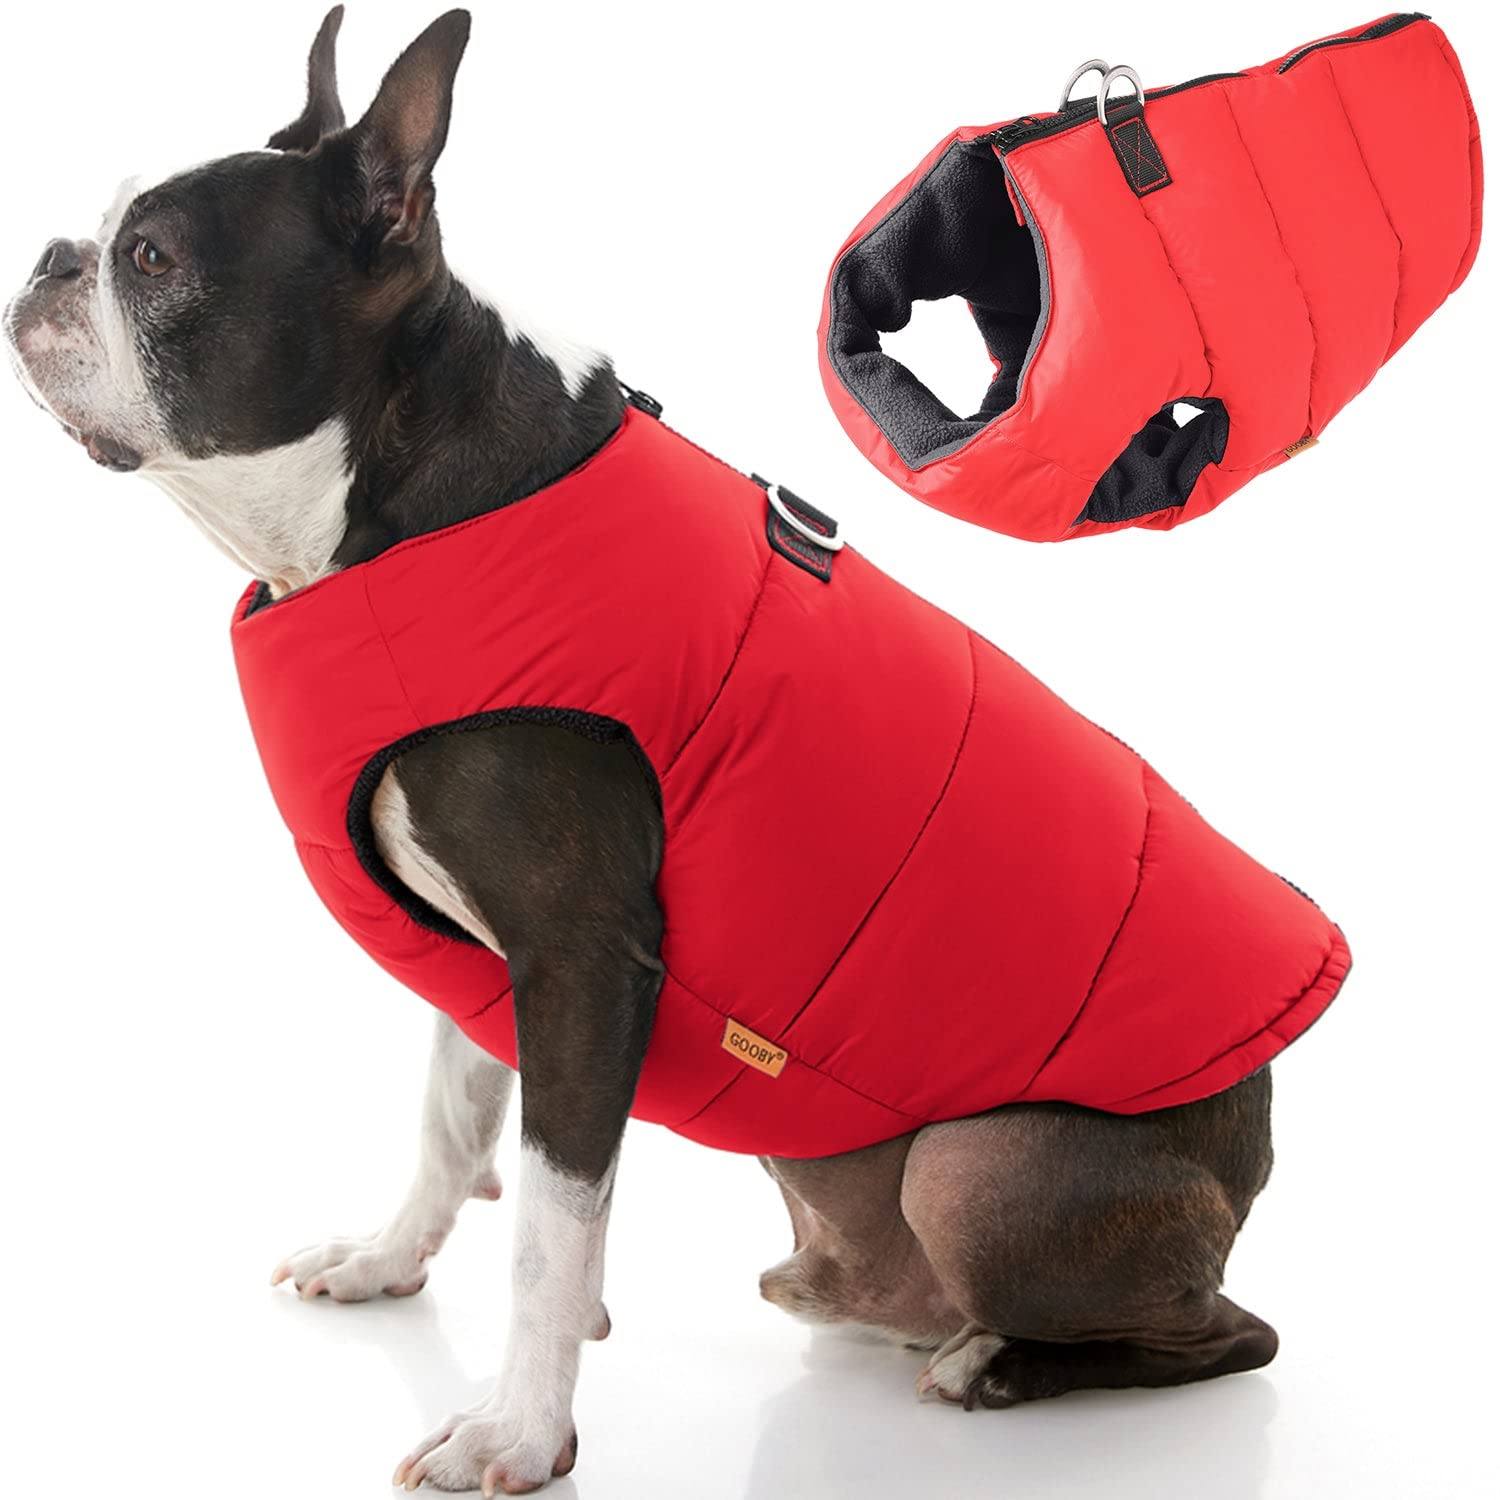 gooby Padded Vest Dog Jacket - Solid Red Small - Warm Zip Up Dog Vest Fleece Jacket with Dual D Ring Leash - Winter Water Resist